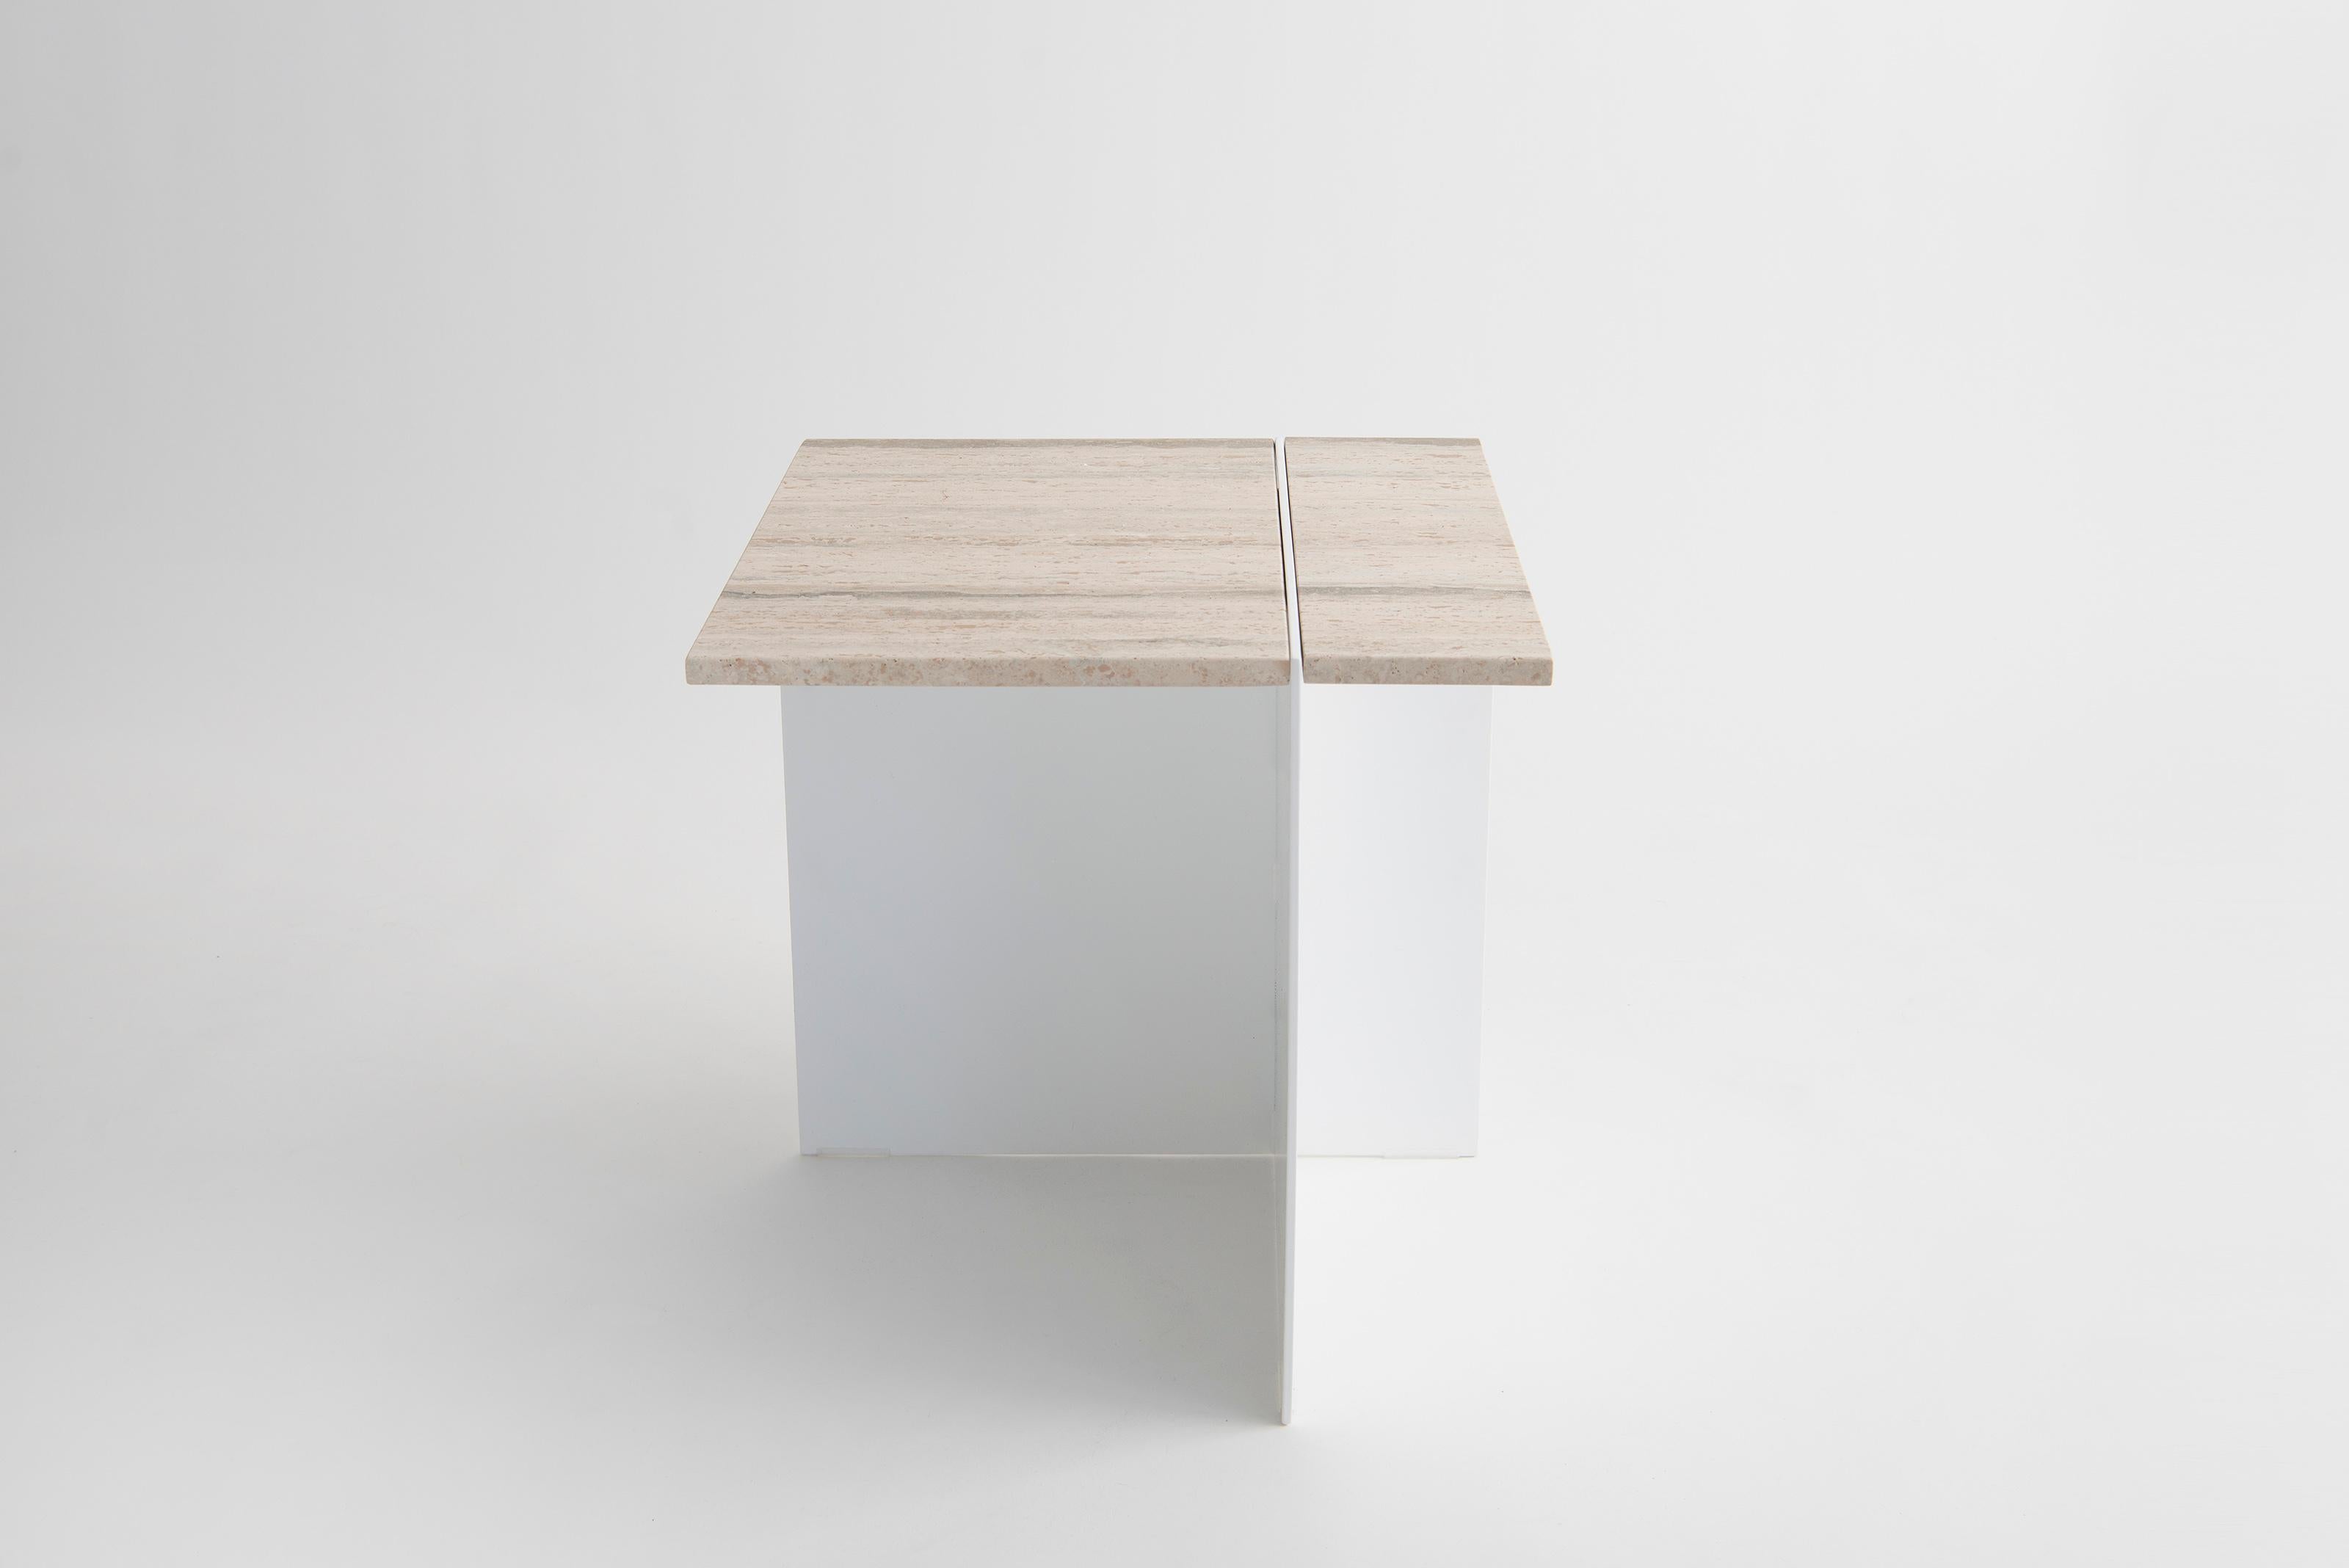 Division Side Table by Phase Design
Dimensions: D 50,8 x W 55,9 x H 55,9 cm. 
Materials: Powder-coated solid steel and travertine.

Solid steel sheet available in a flat black or white powder coat finish. Powder coat finishes are available in custom